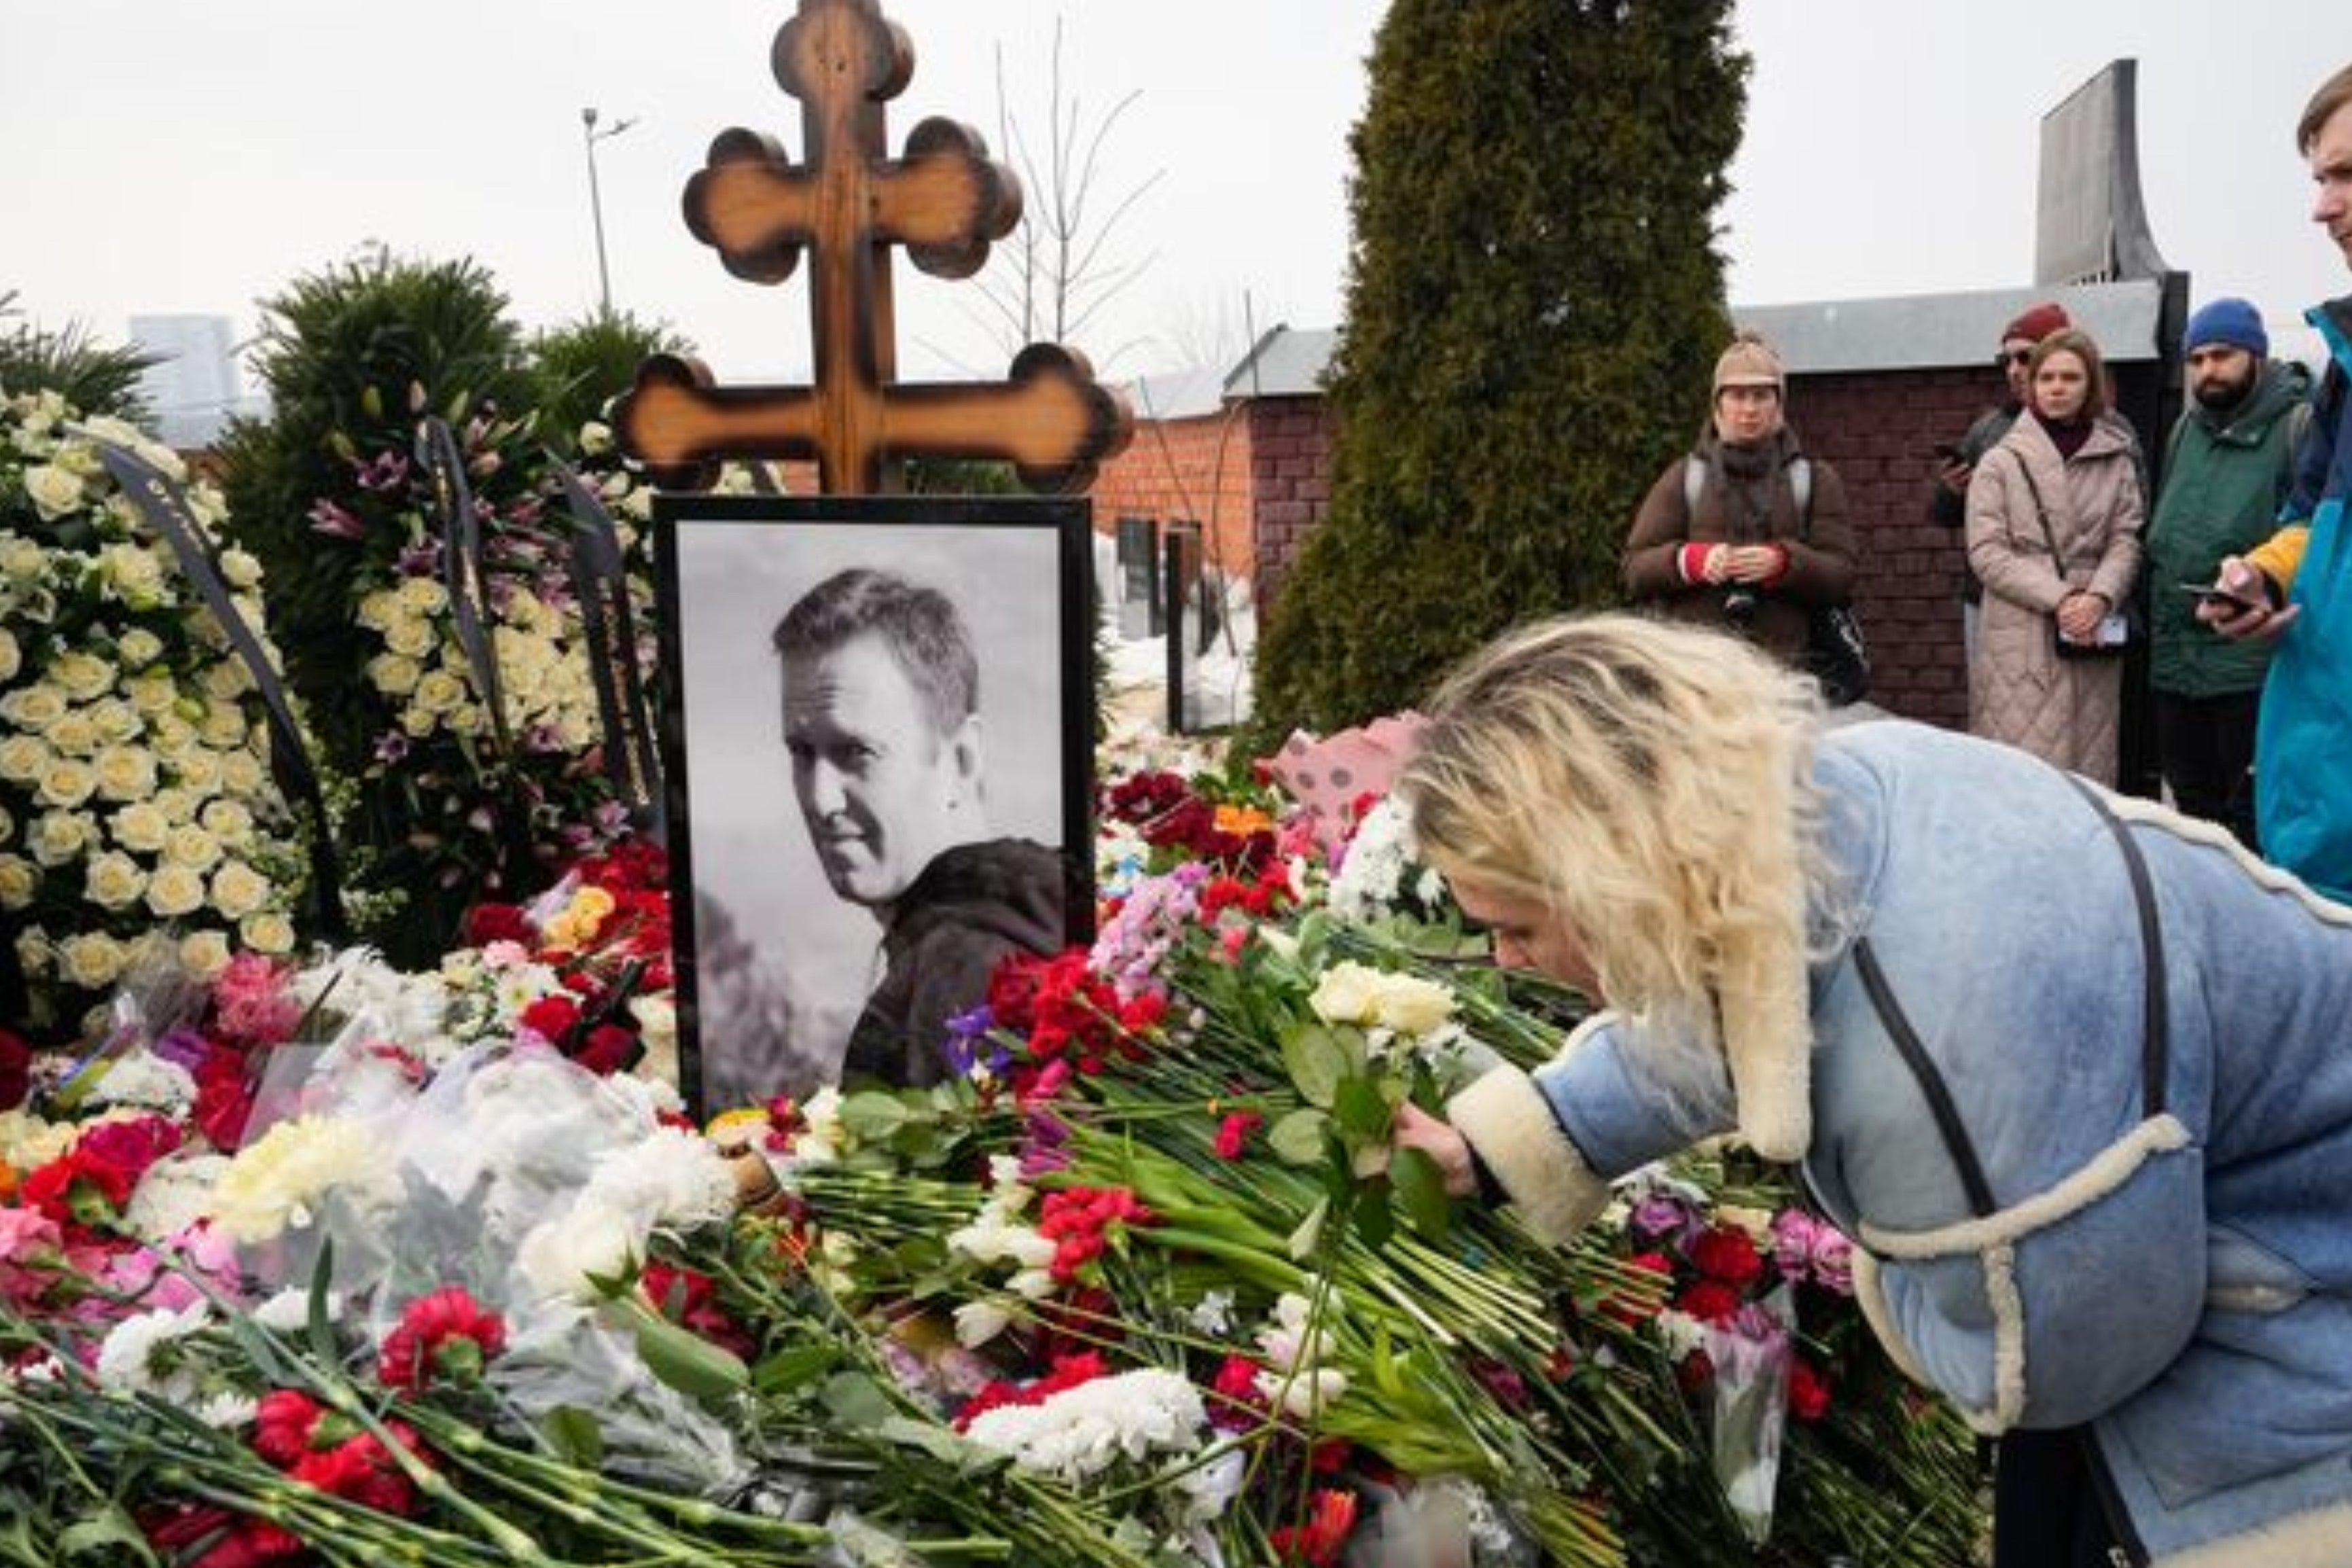 Hundreds of Russians in front of Alexei Navalny's grave the day after his funeral